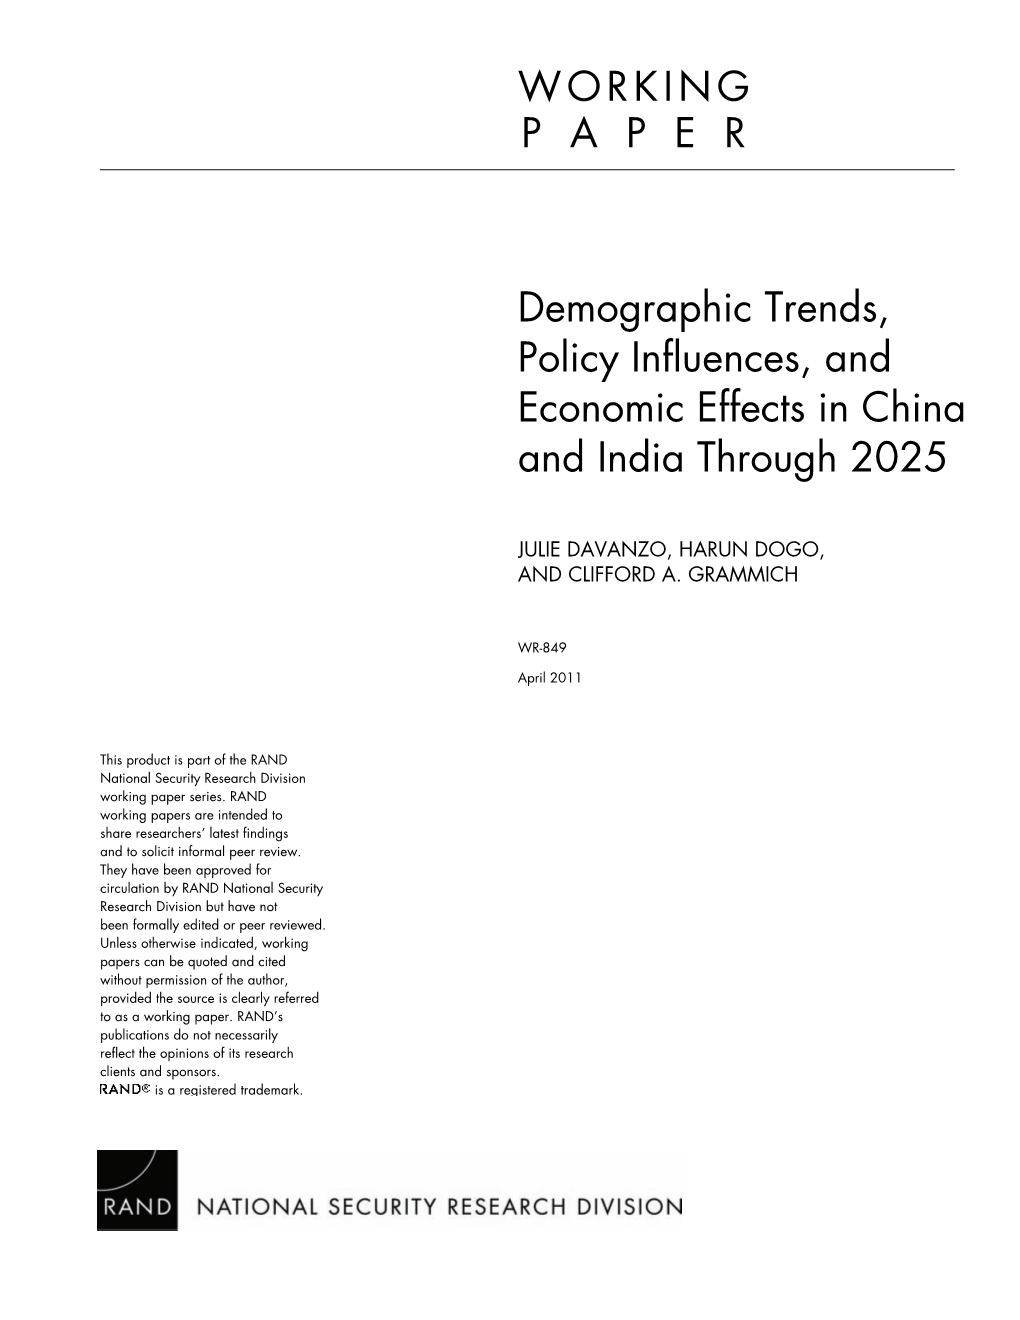 Demographic Trends, Policy Influences, and Economic Effects in China and India Through 2025